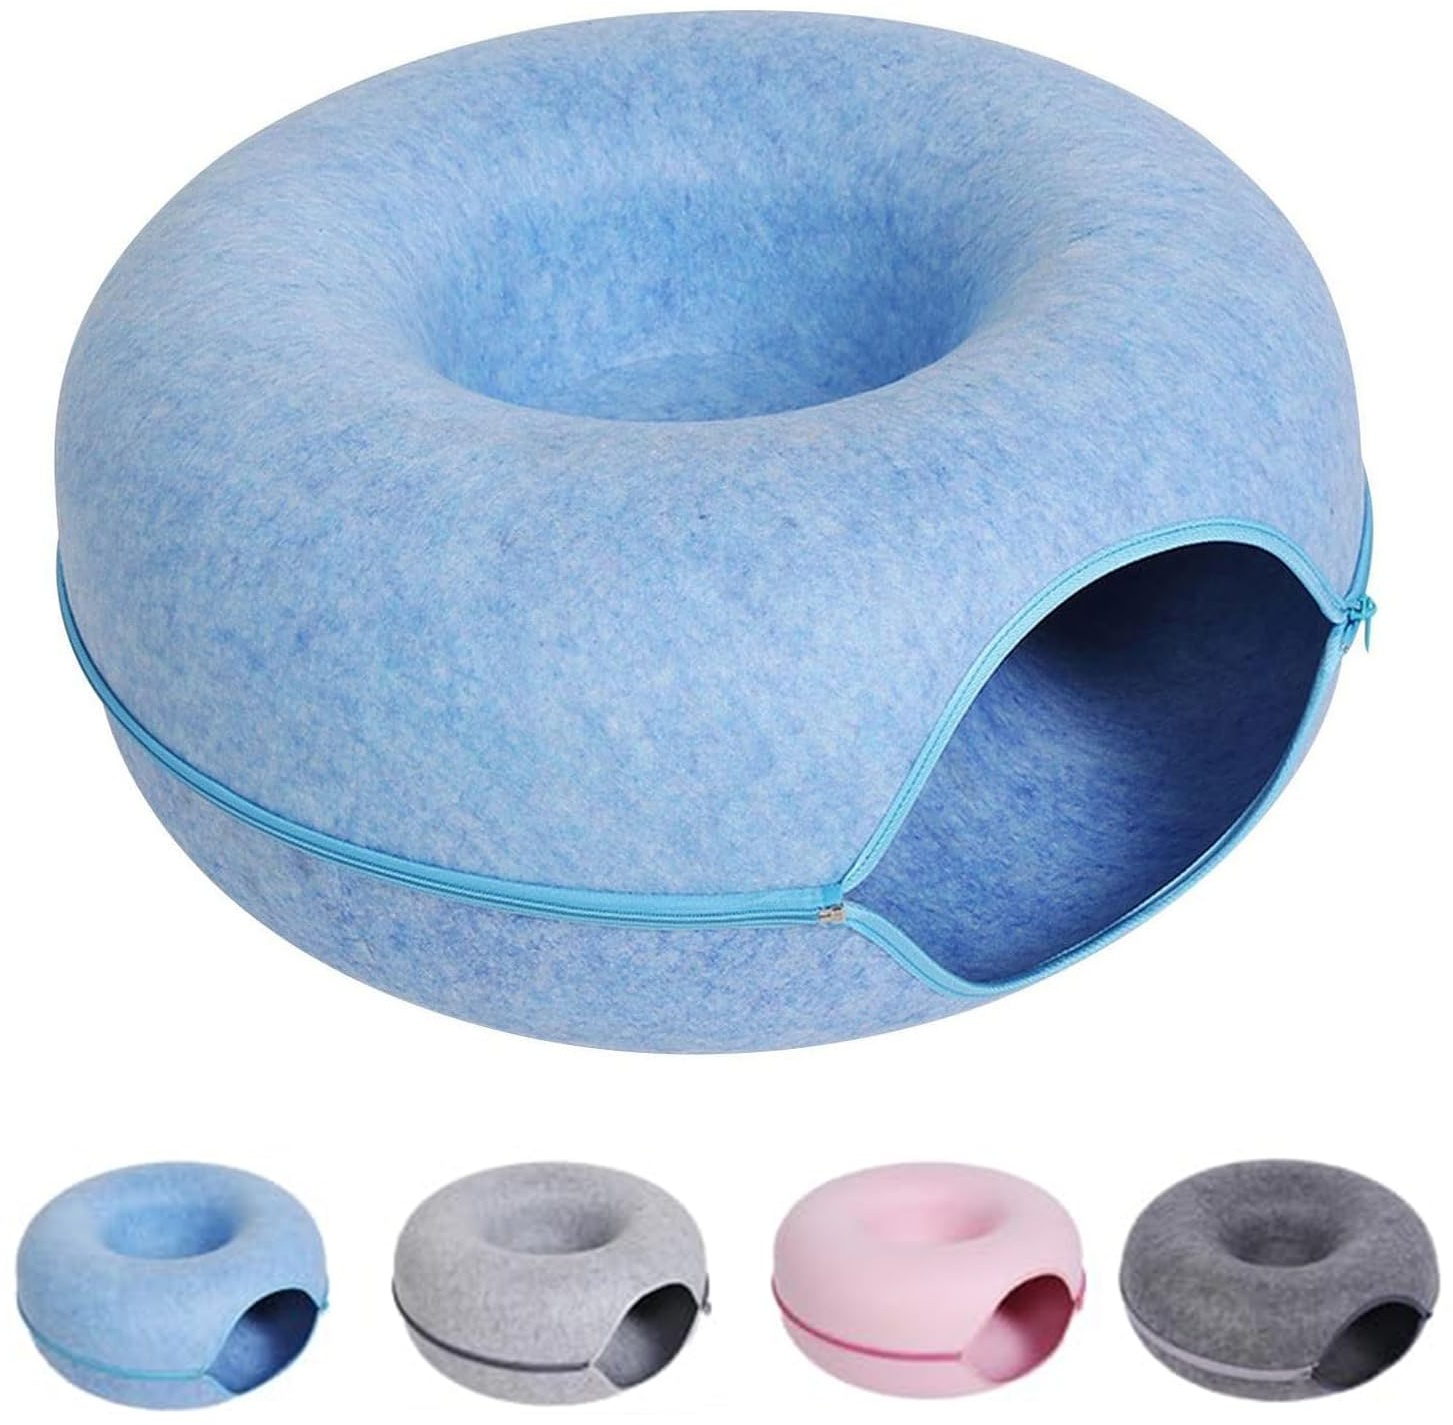 Meowmaze Cat Bed, Meow Maze Tunnel Bed, Round Felt Cat Tunnel Removable Cat Nest Bed, Washable Interior Cat Play Tunnel for About 9 Lbs Small Pets (S,Blue)